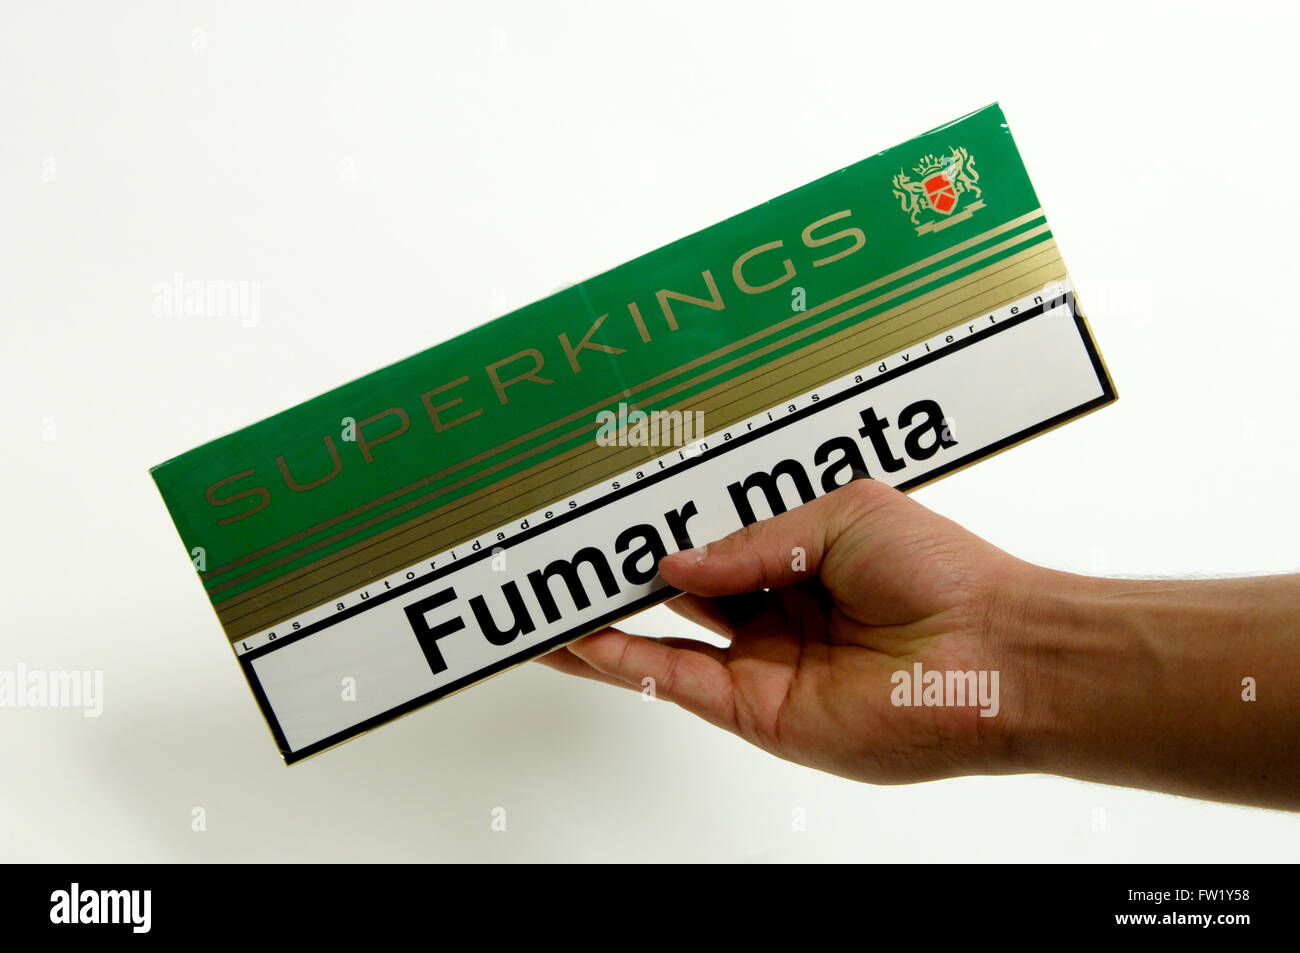 Super Kings Cigarettes Carton On Sale In A Tobacconist Stock Photo